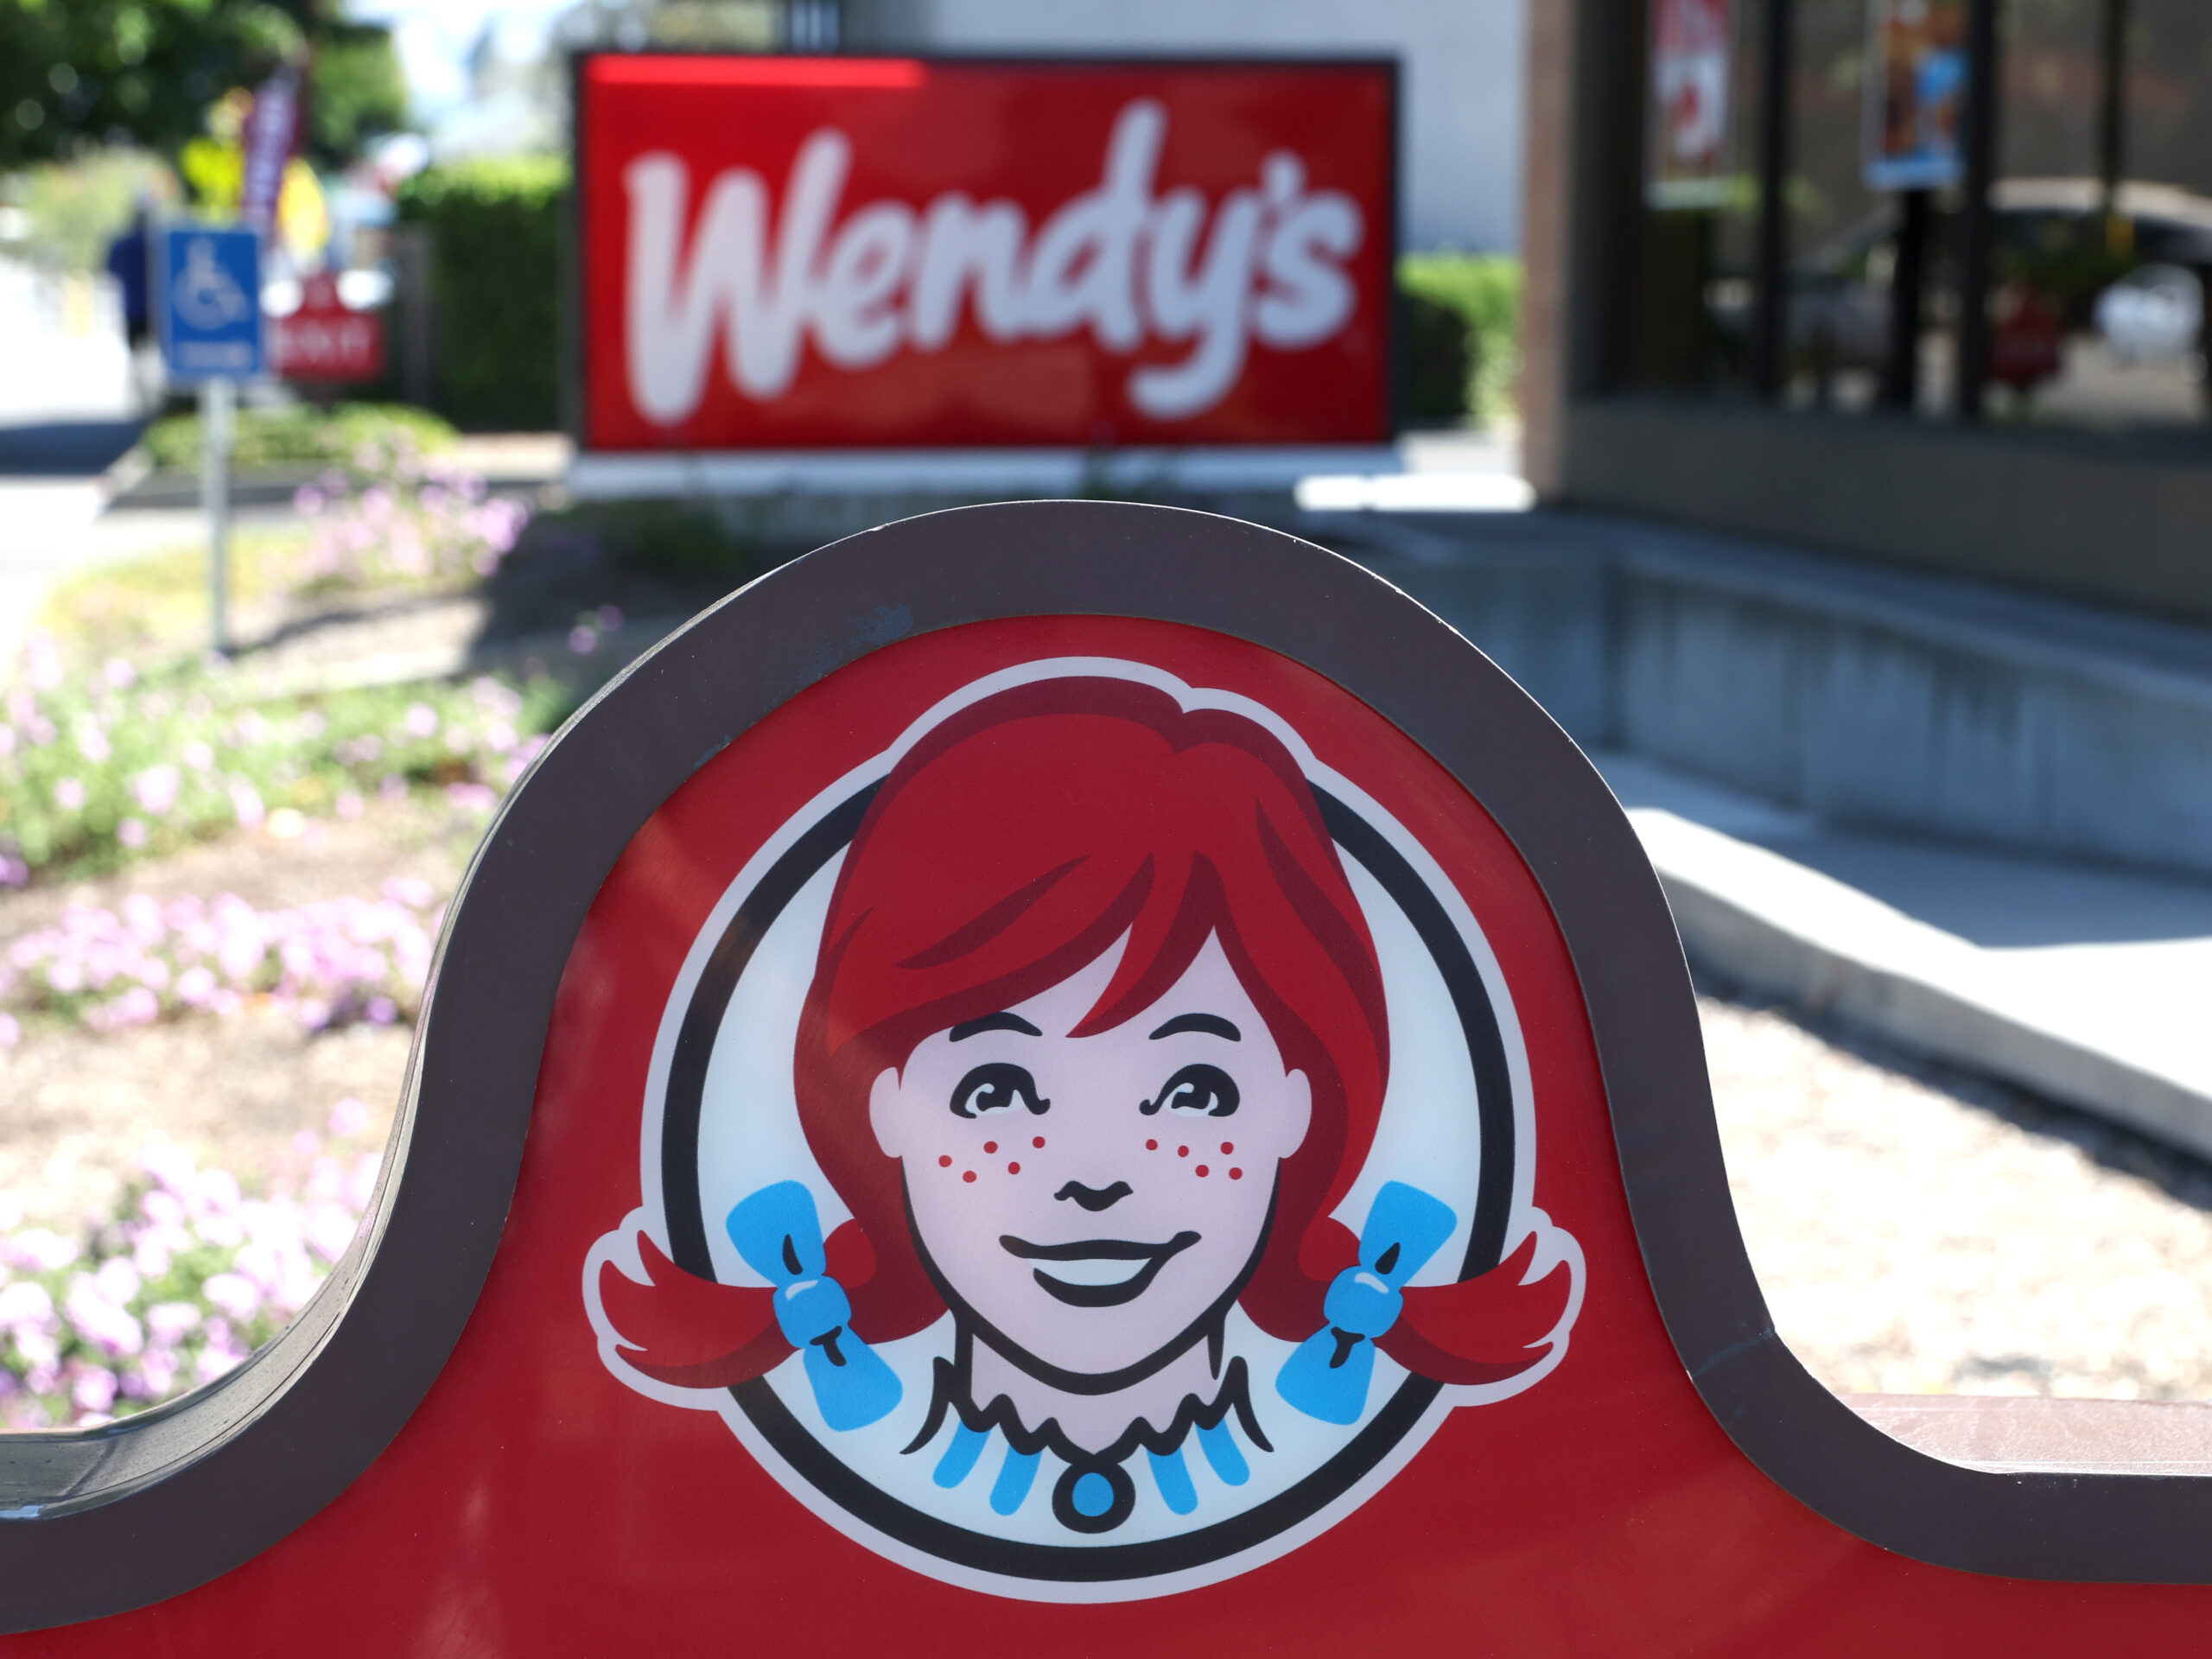 No, Wendy’s says it isn’t planning to introduce surge pricing